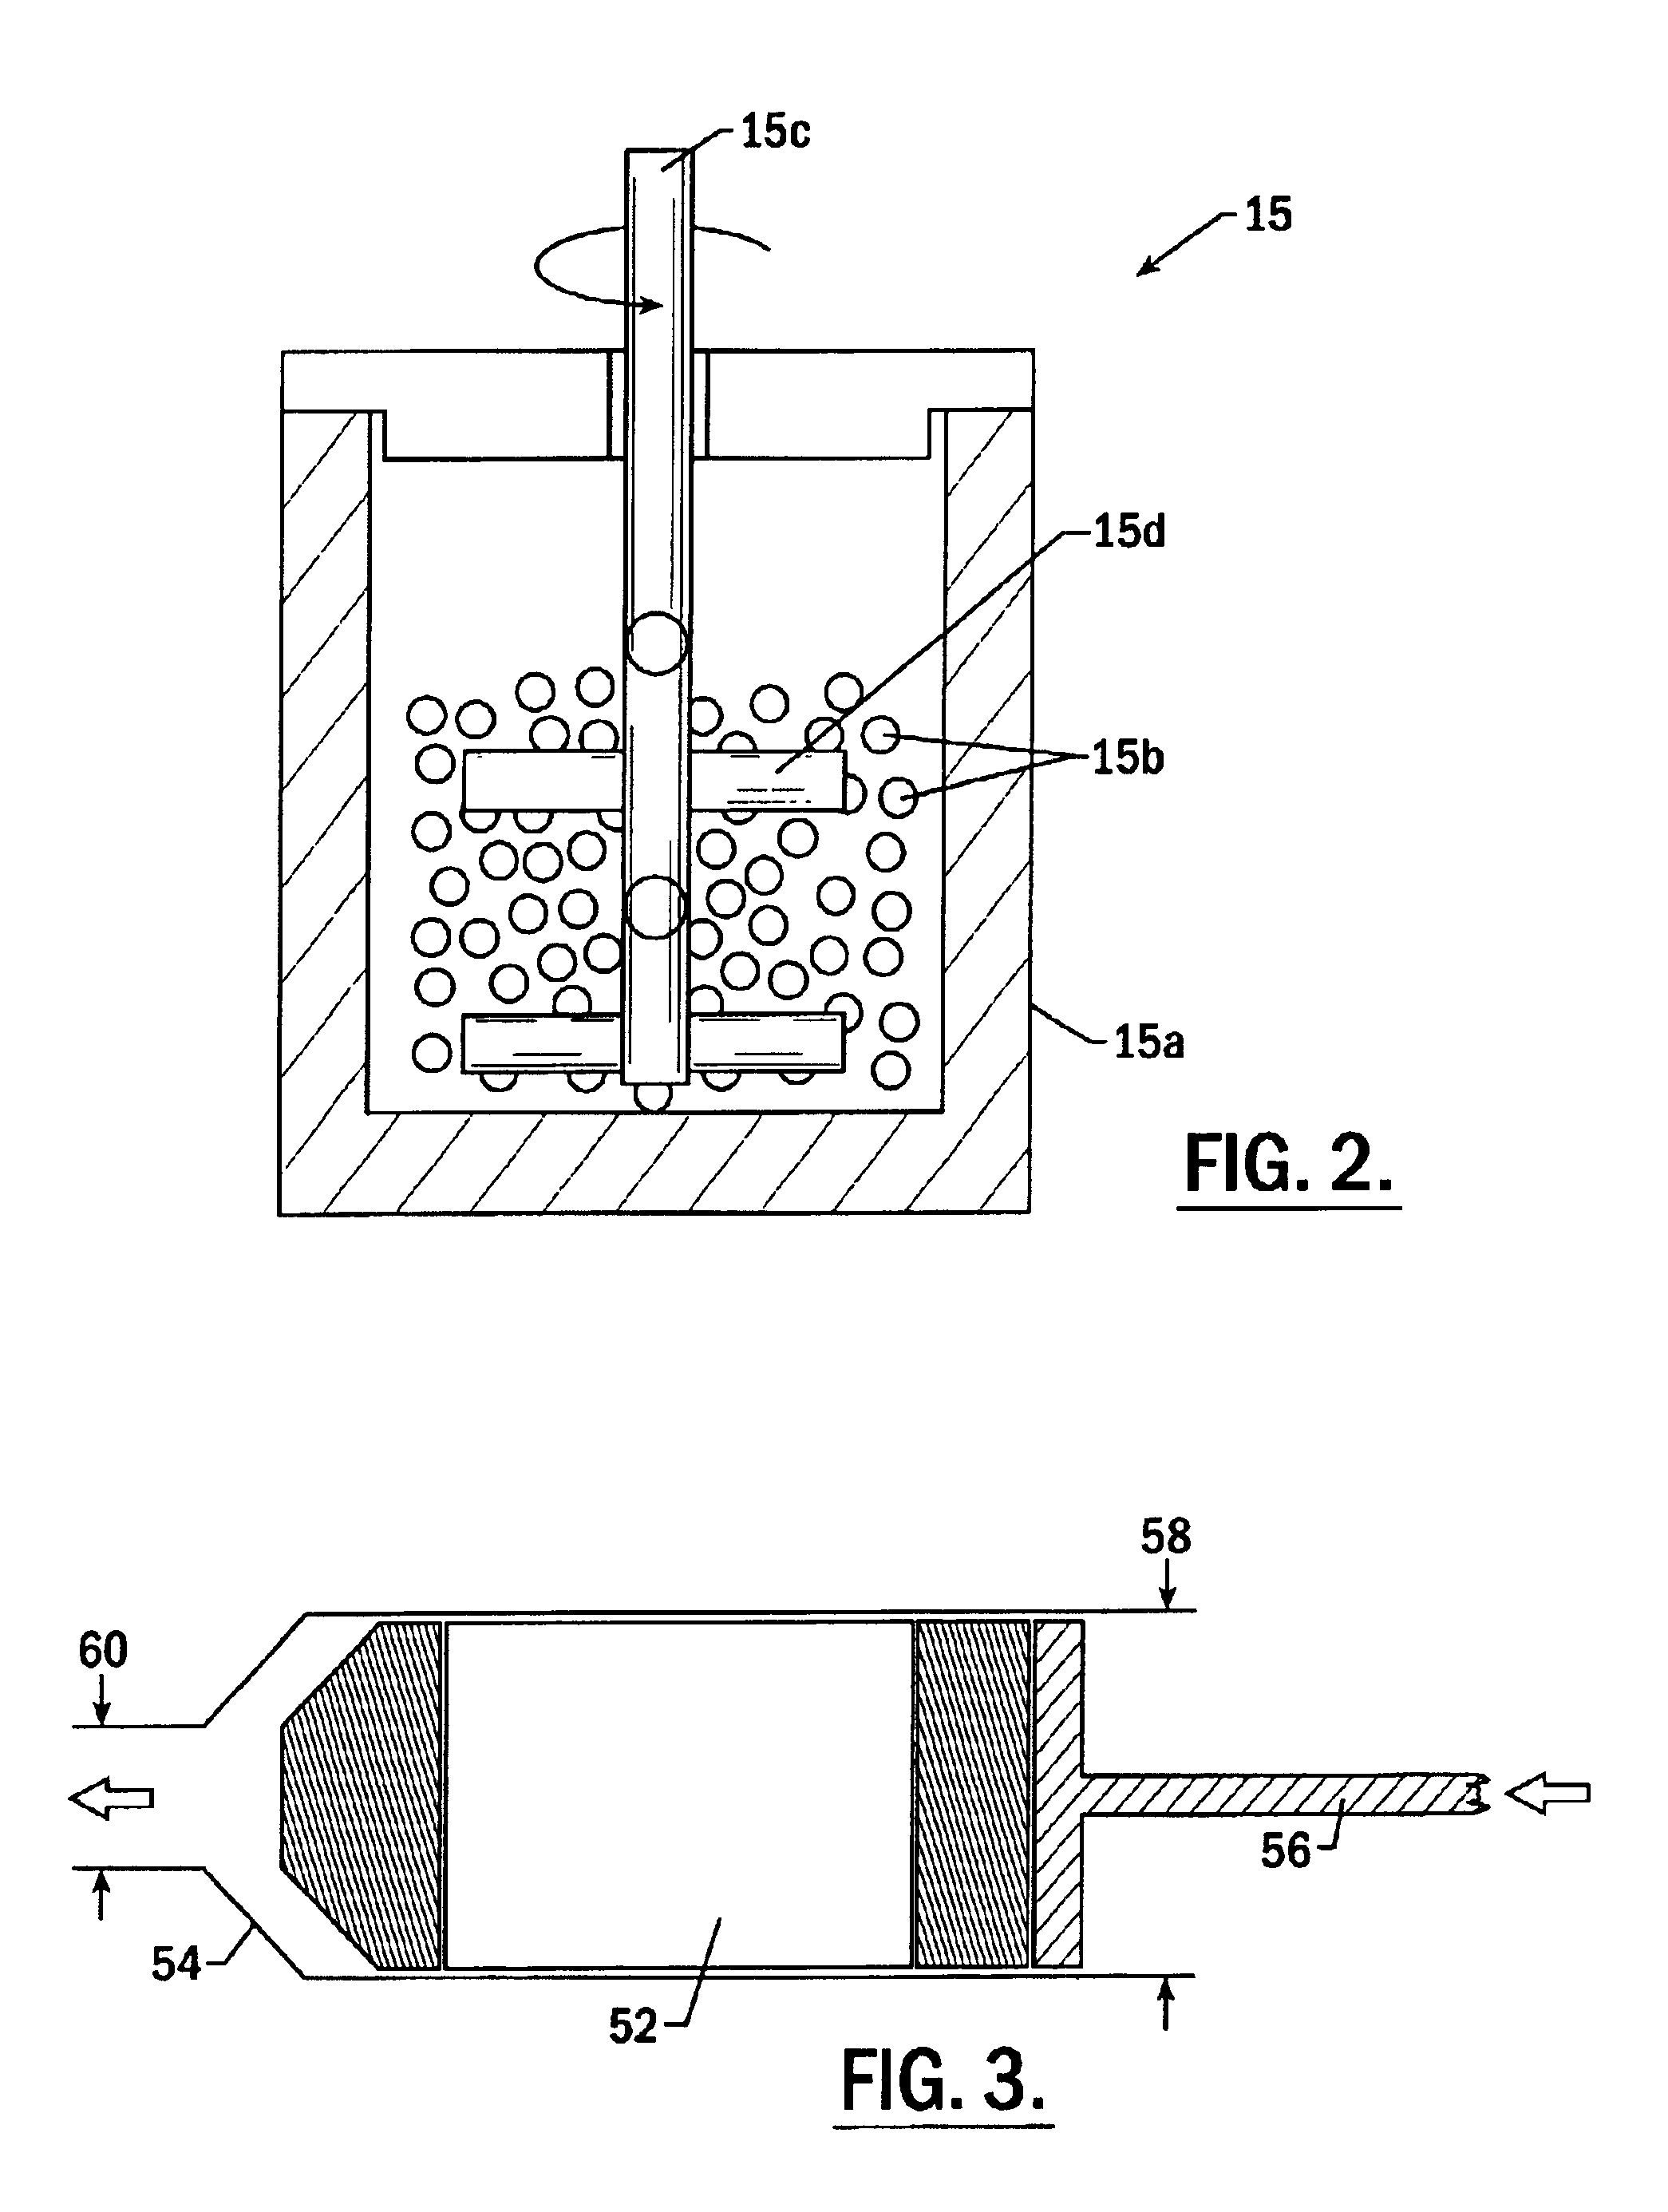 Method for preparing cryomilled aluminum alloys and components extruded and forged therefrom